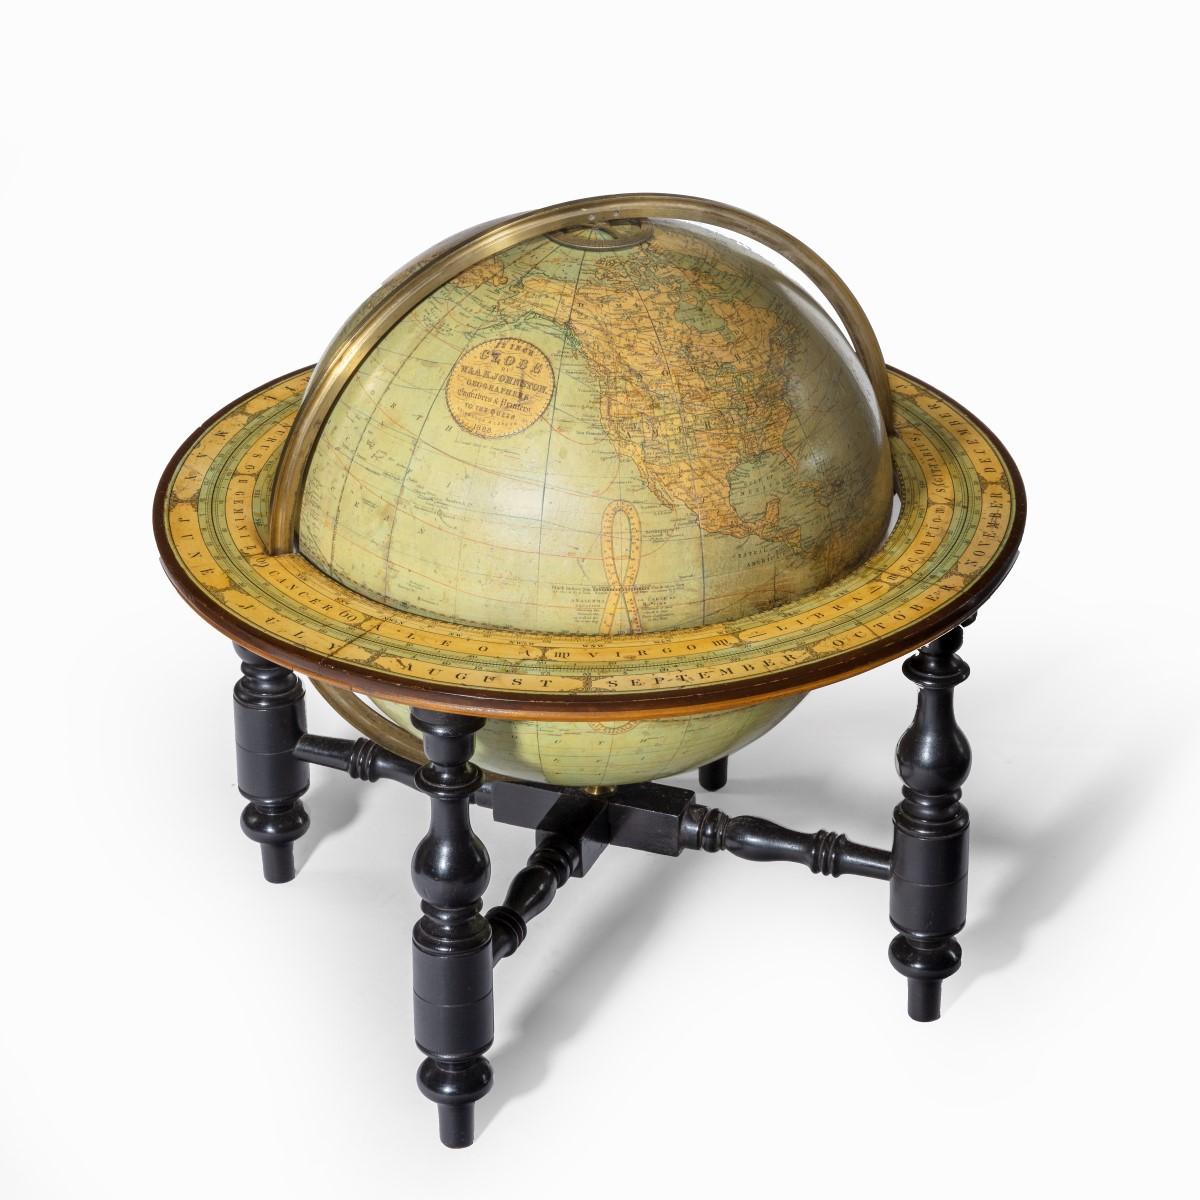 A 12 inch globe by W & AK Johnston, dated 1888, the terrestrial globe set in an ebonized stand with four turned legs and cross stretchers, the cartouche reading ‘12inch Globe by W. & A.K. Johnston Geographers and Printers to the Queen, Edinburgh and